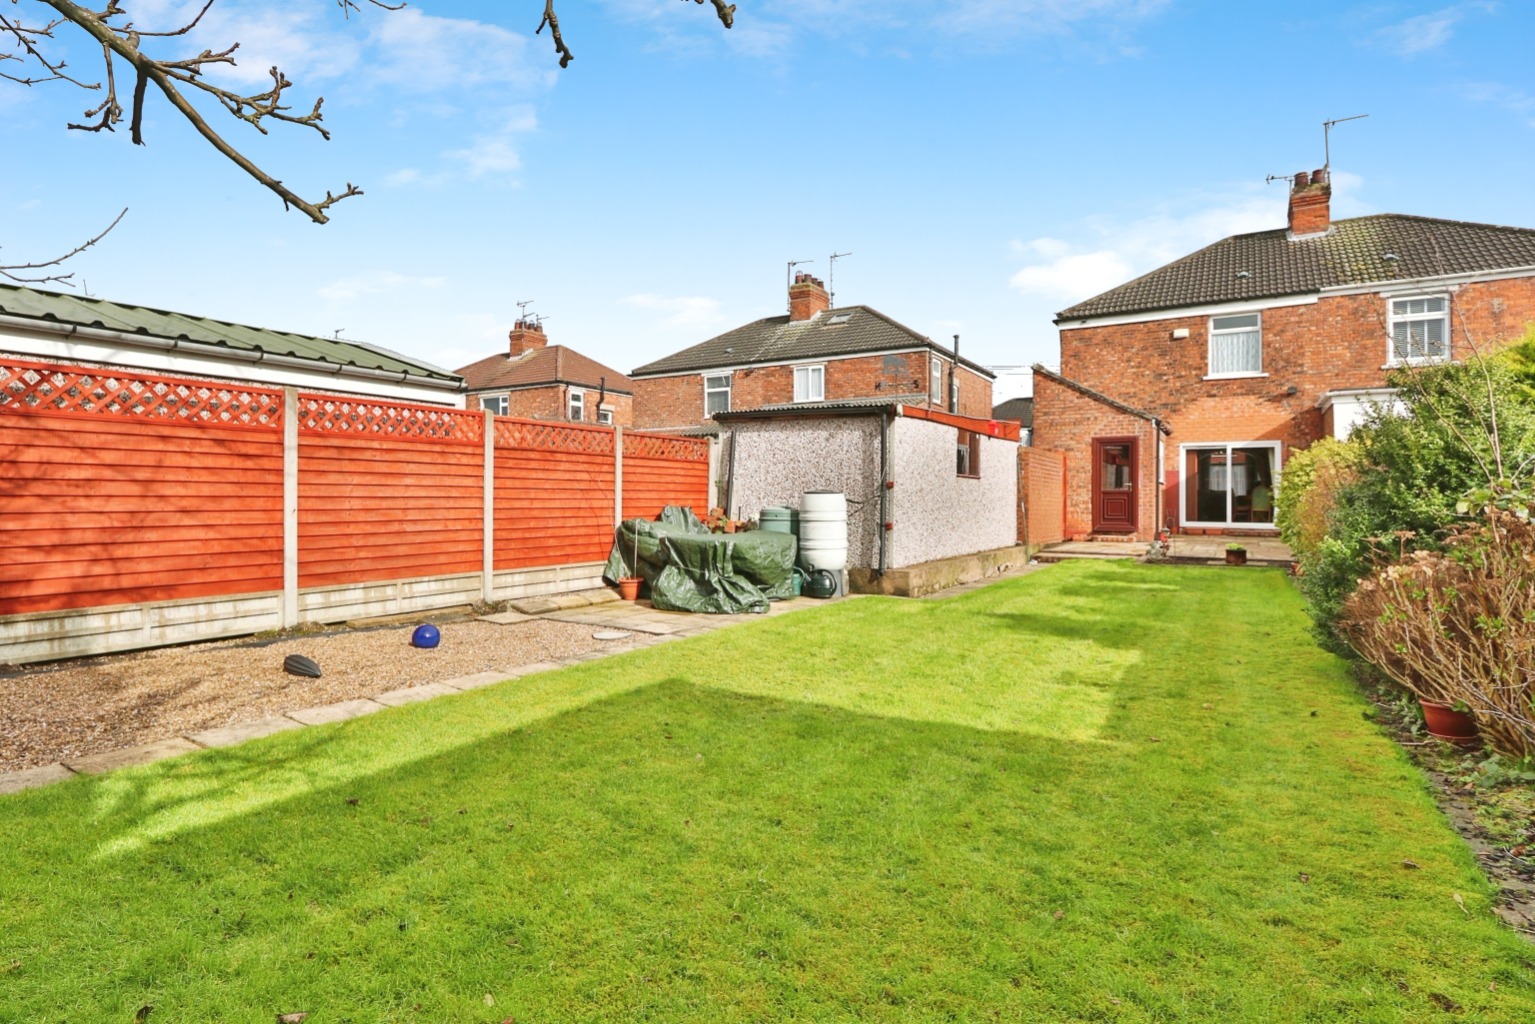 3 bed semi-detached house for sale in Ellesmere Avenue, Hull - Property Image 1